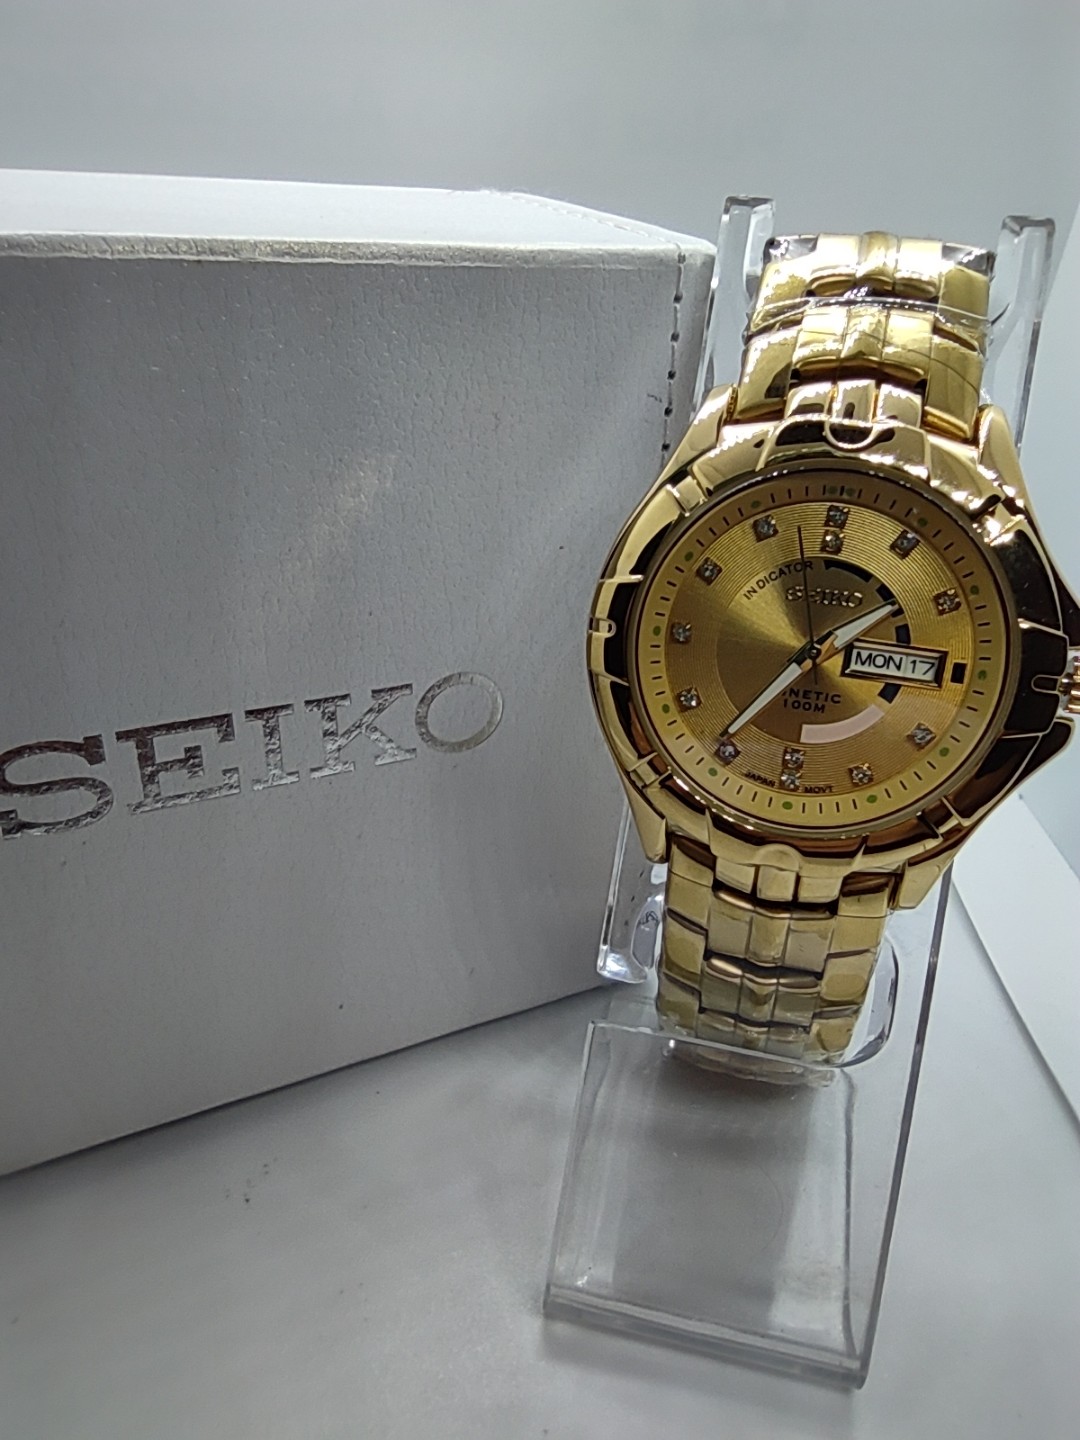 Seiko kinetic watch for men gold, Men's Fashion, & Watches on Carousell